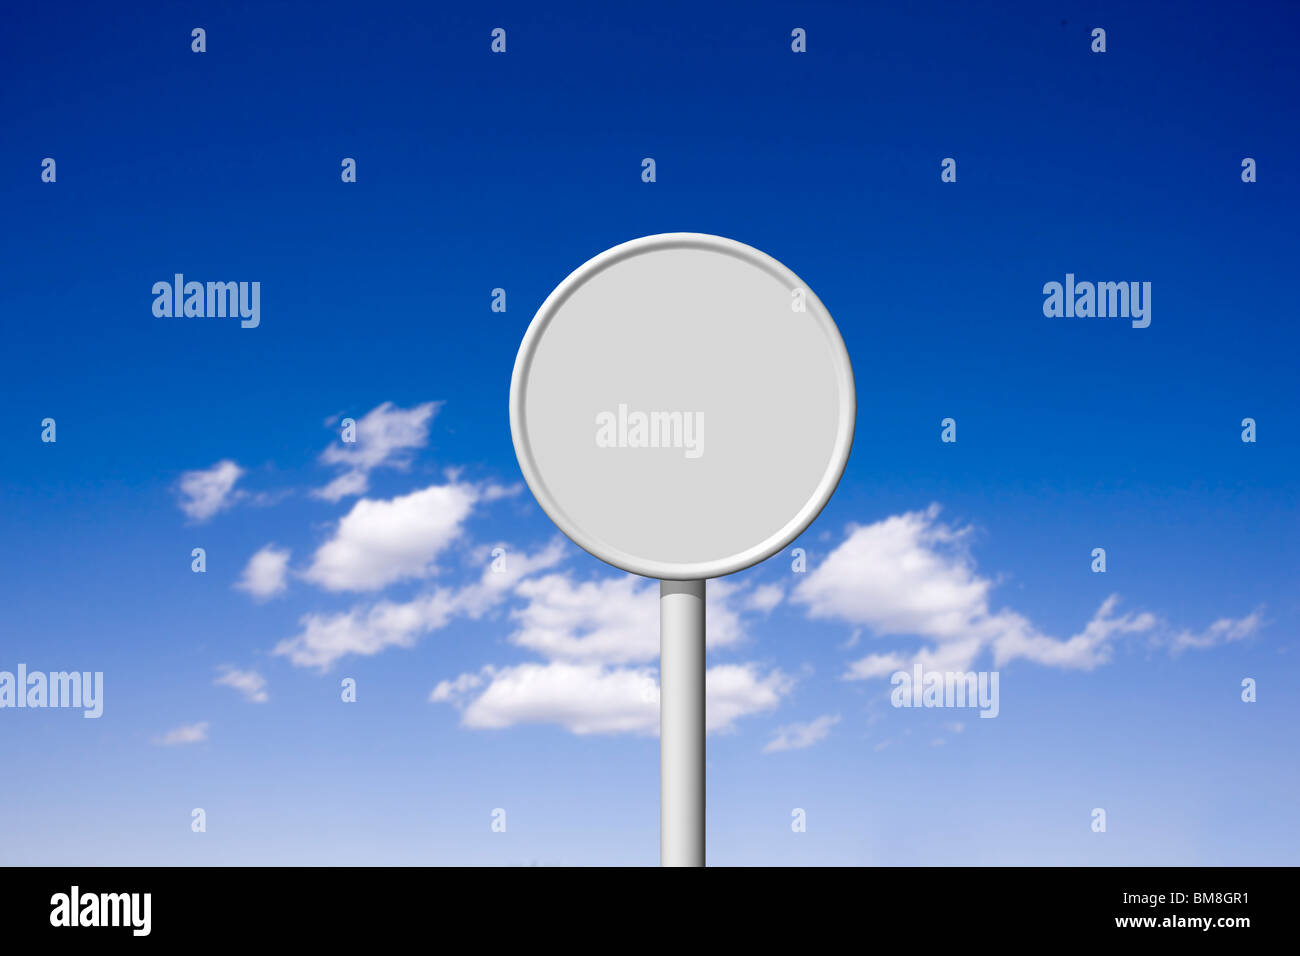 Blank road sign against sky, computer graphic Banque D'Images